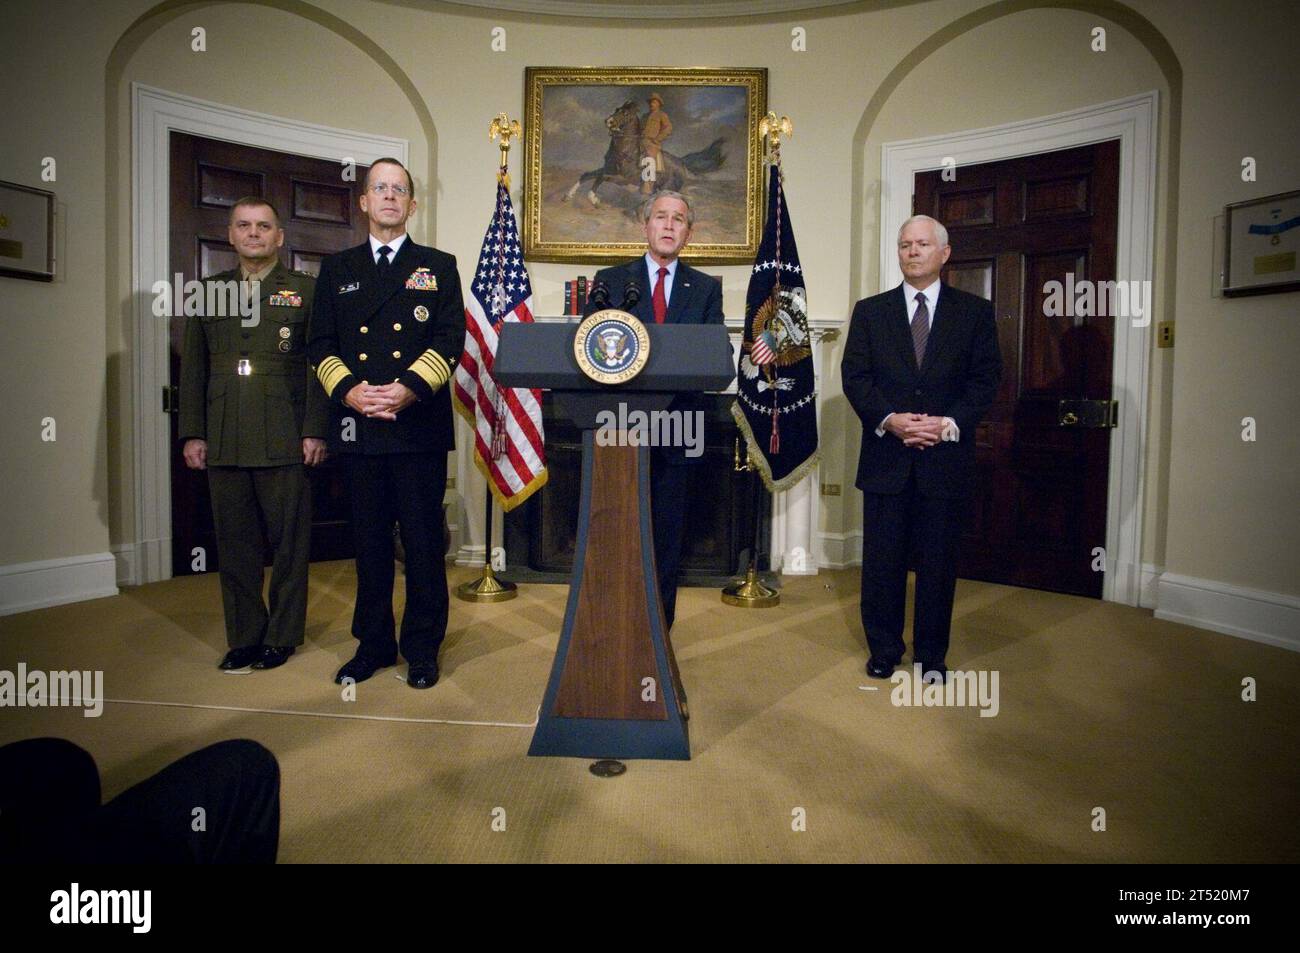 0706280696M-113 WASHINGTON, D.C. (June 28, 2007) - President George W. Bush announces the nomination of current Chief of Naval Operations (CNO) Adm. Mike Mullen and Commander, United States Strategic Command, Gen. James E. Cartwright as Chairman and Vice-Chairman of the Joint Chiefs of Staff, respectively. The ceremony was held in the Roosevelt Room at the White House. U.S. Navy Stock Photo